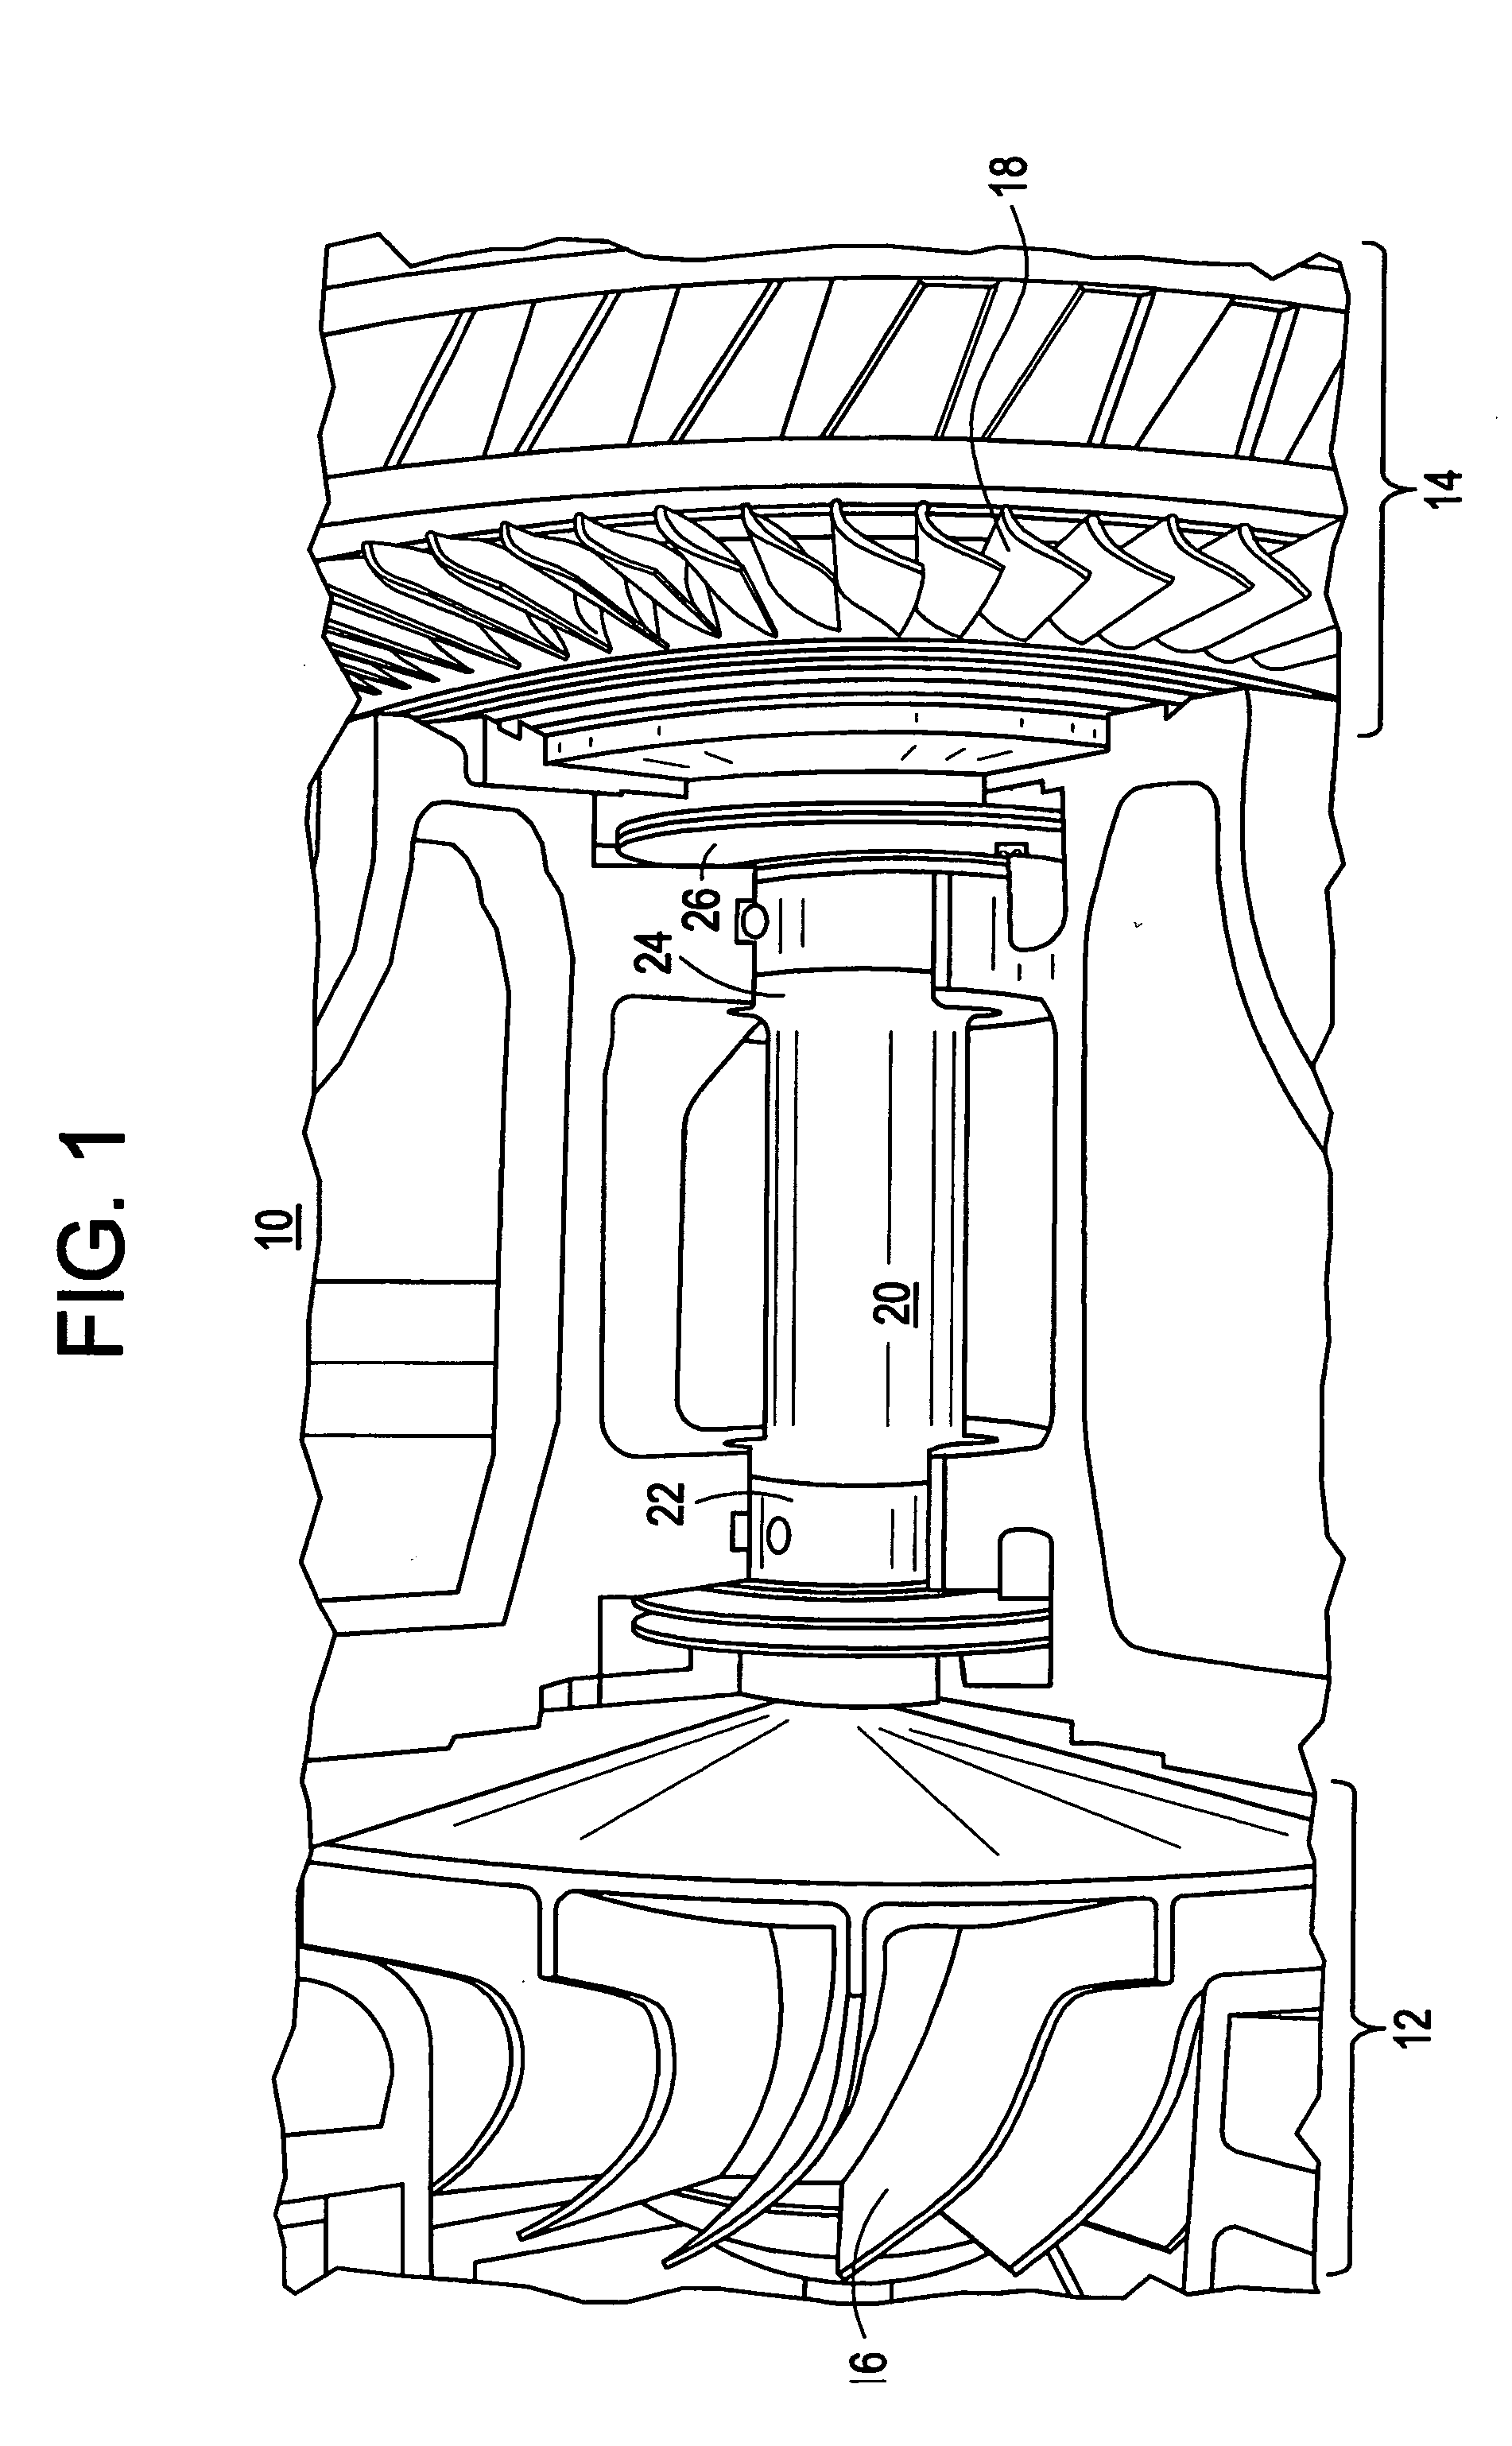 Bearing assembly with fluid circuit for delivery of lubricating fluid between bearing surfaces